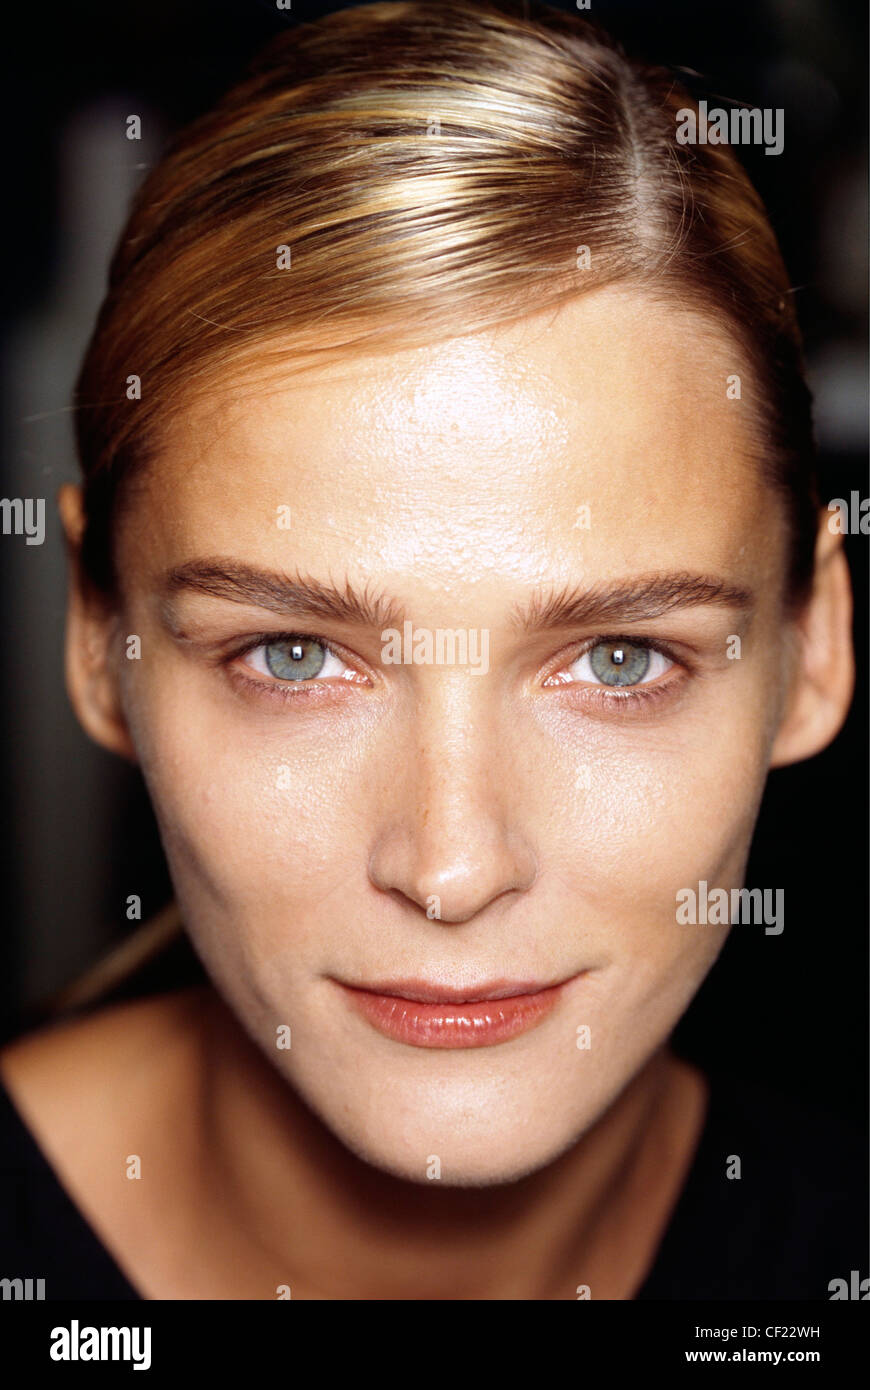 Prada Backstage Milan Ready to Wear S S Head shot of Estonian model Carmen  Kass hair pulled back, half smiling and looking Stock Photo - Alamy